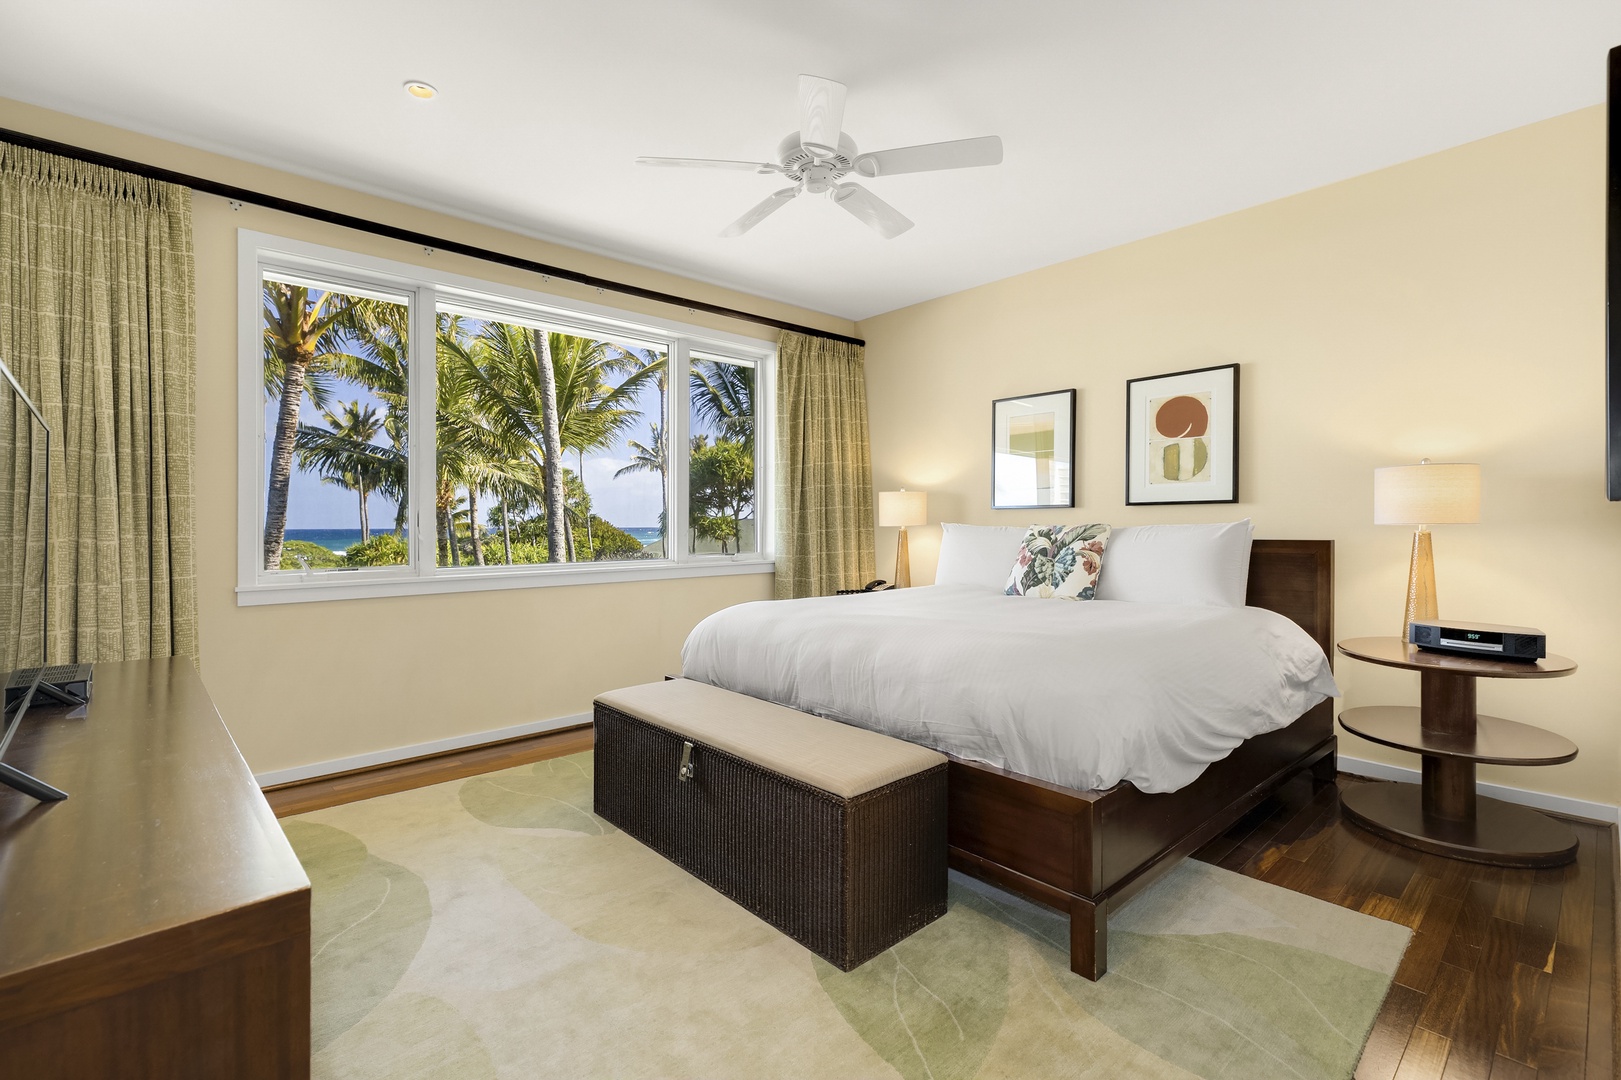 Kahuku Vacation Rentals, OFB Turtle Bay Villas 303 - Primary Bedroom with gorgeous views